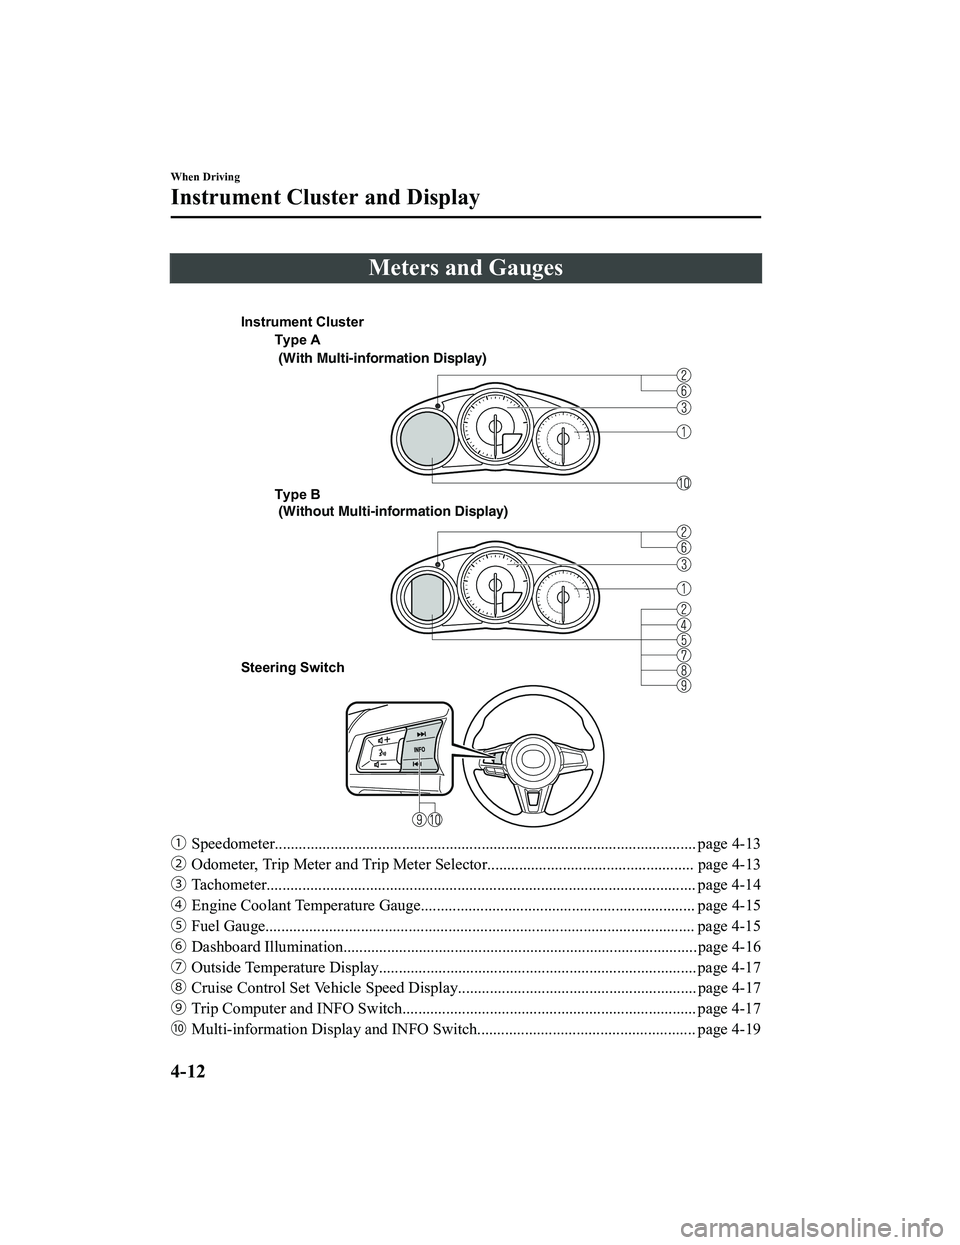 MAZDA MODEL MX-5 MIATA RF 2020  Owners Manual Meters and Gauges
 
Type A
Type B 
Steering Switch  (With Multi-information Display)
 (Without Multi-information Display)
Instrument Cluster
ƒ
Speedometer............................................